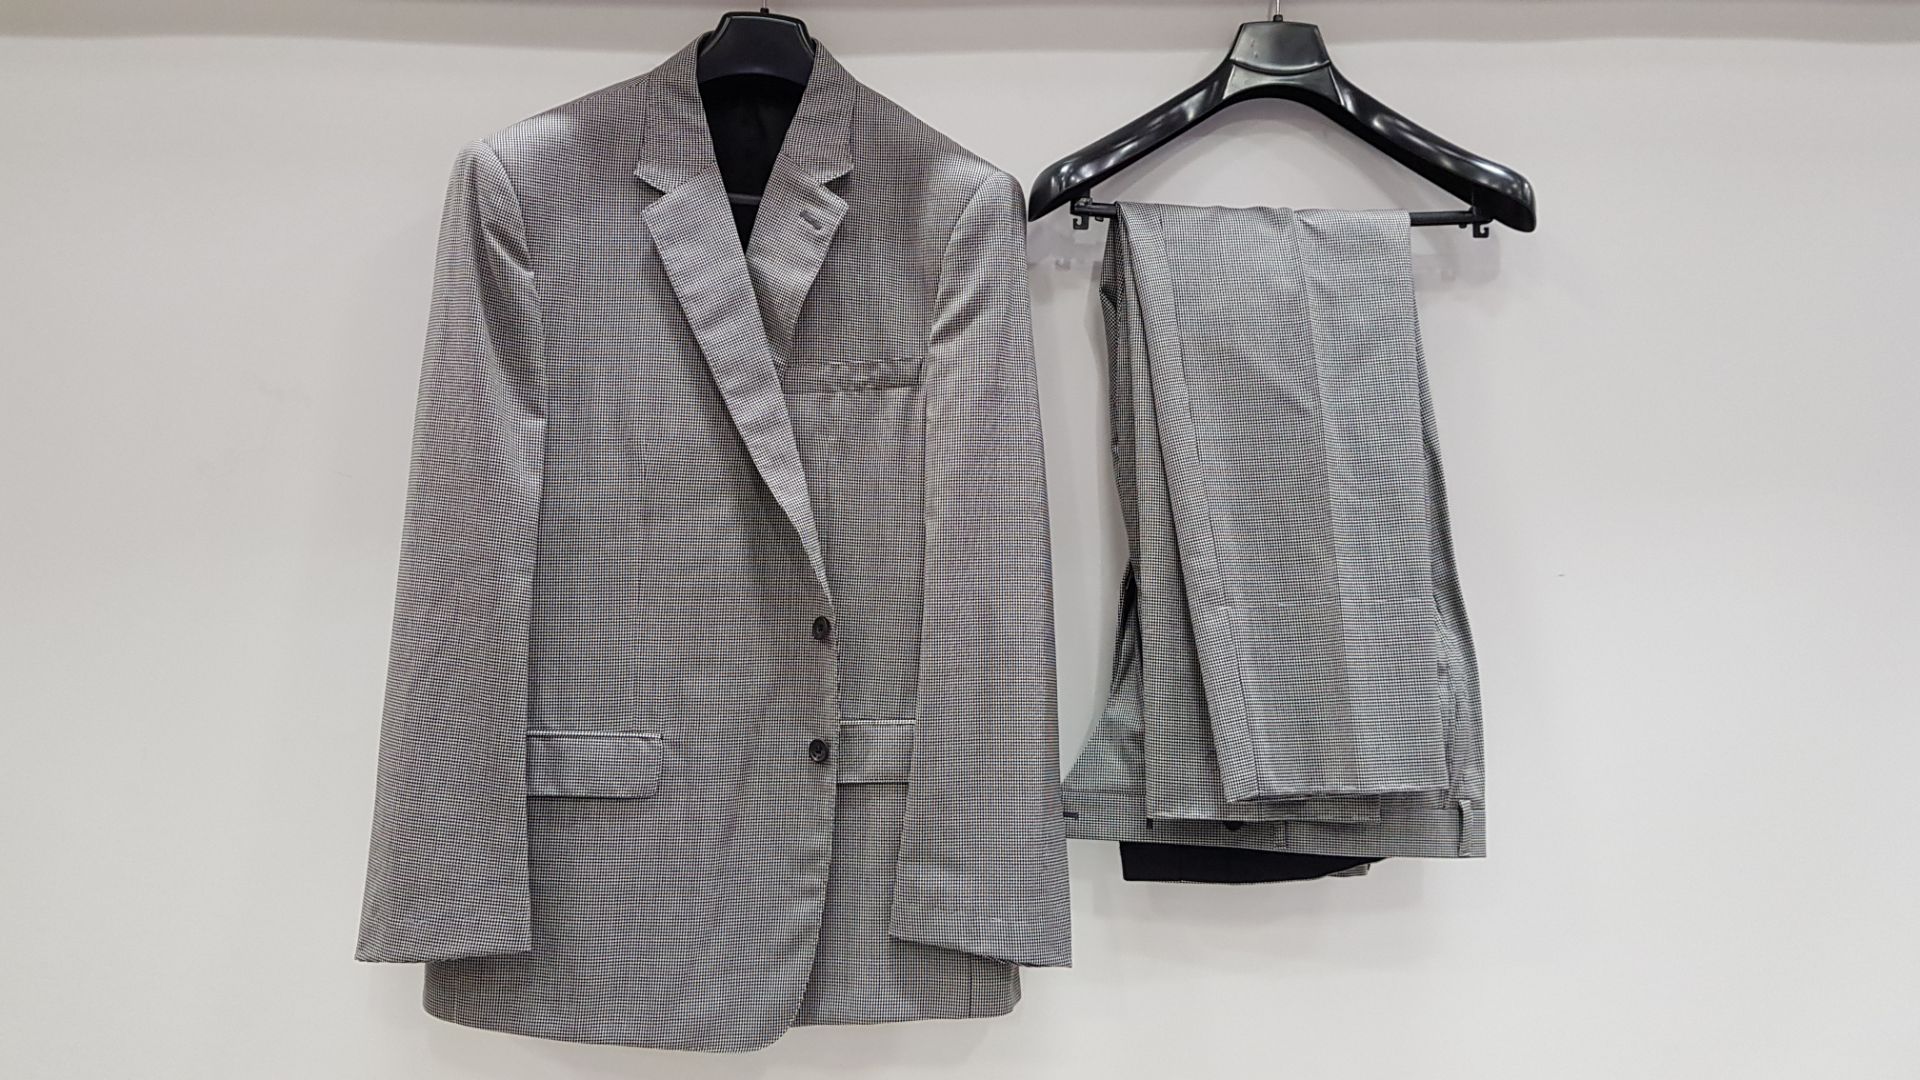 3 X BRAND NEW LUTWYCHE HAND TAILORED LIGHT GREY PATTERNED SUITS SIZE 40R, 50R AND 38S (PLEASE NOTE